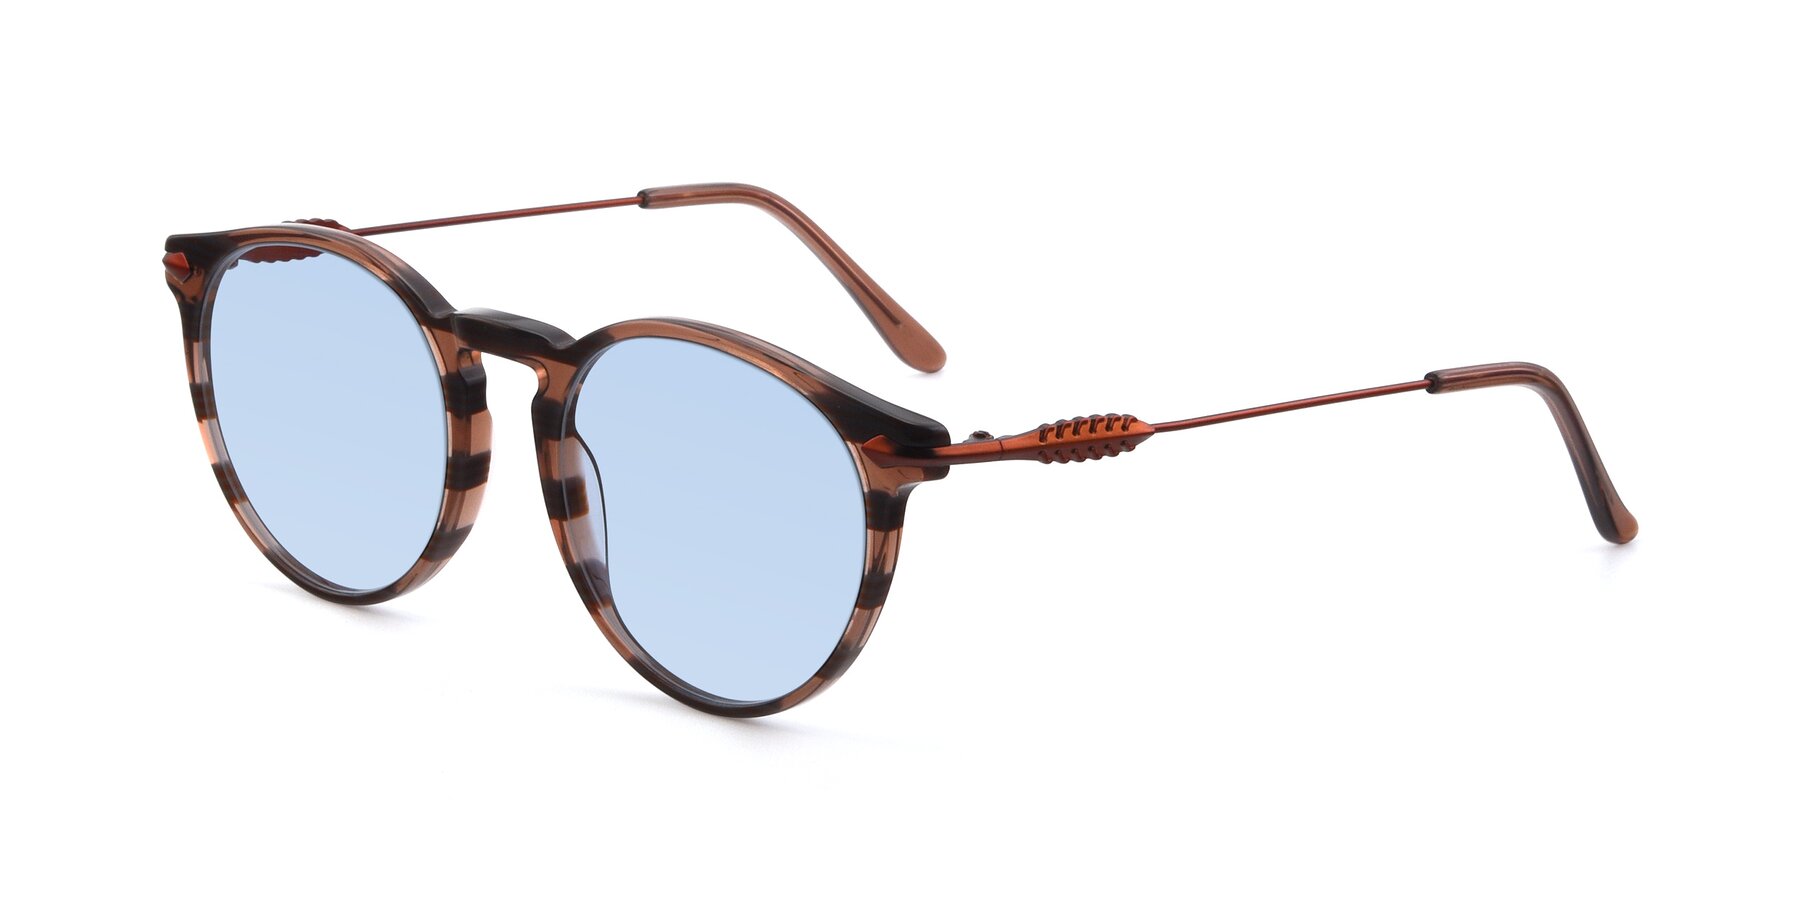 Angle of 17660 in Stripe Brown with Light Blue Tinted Lenses